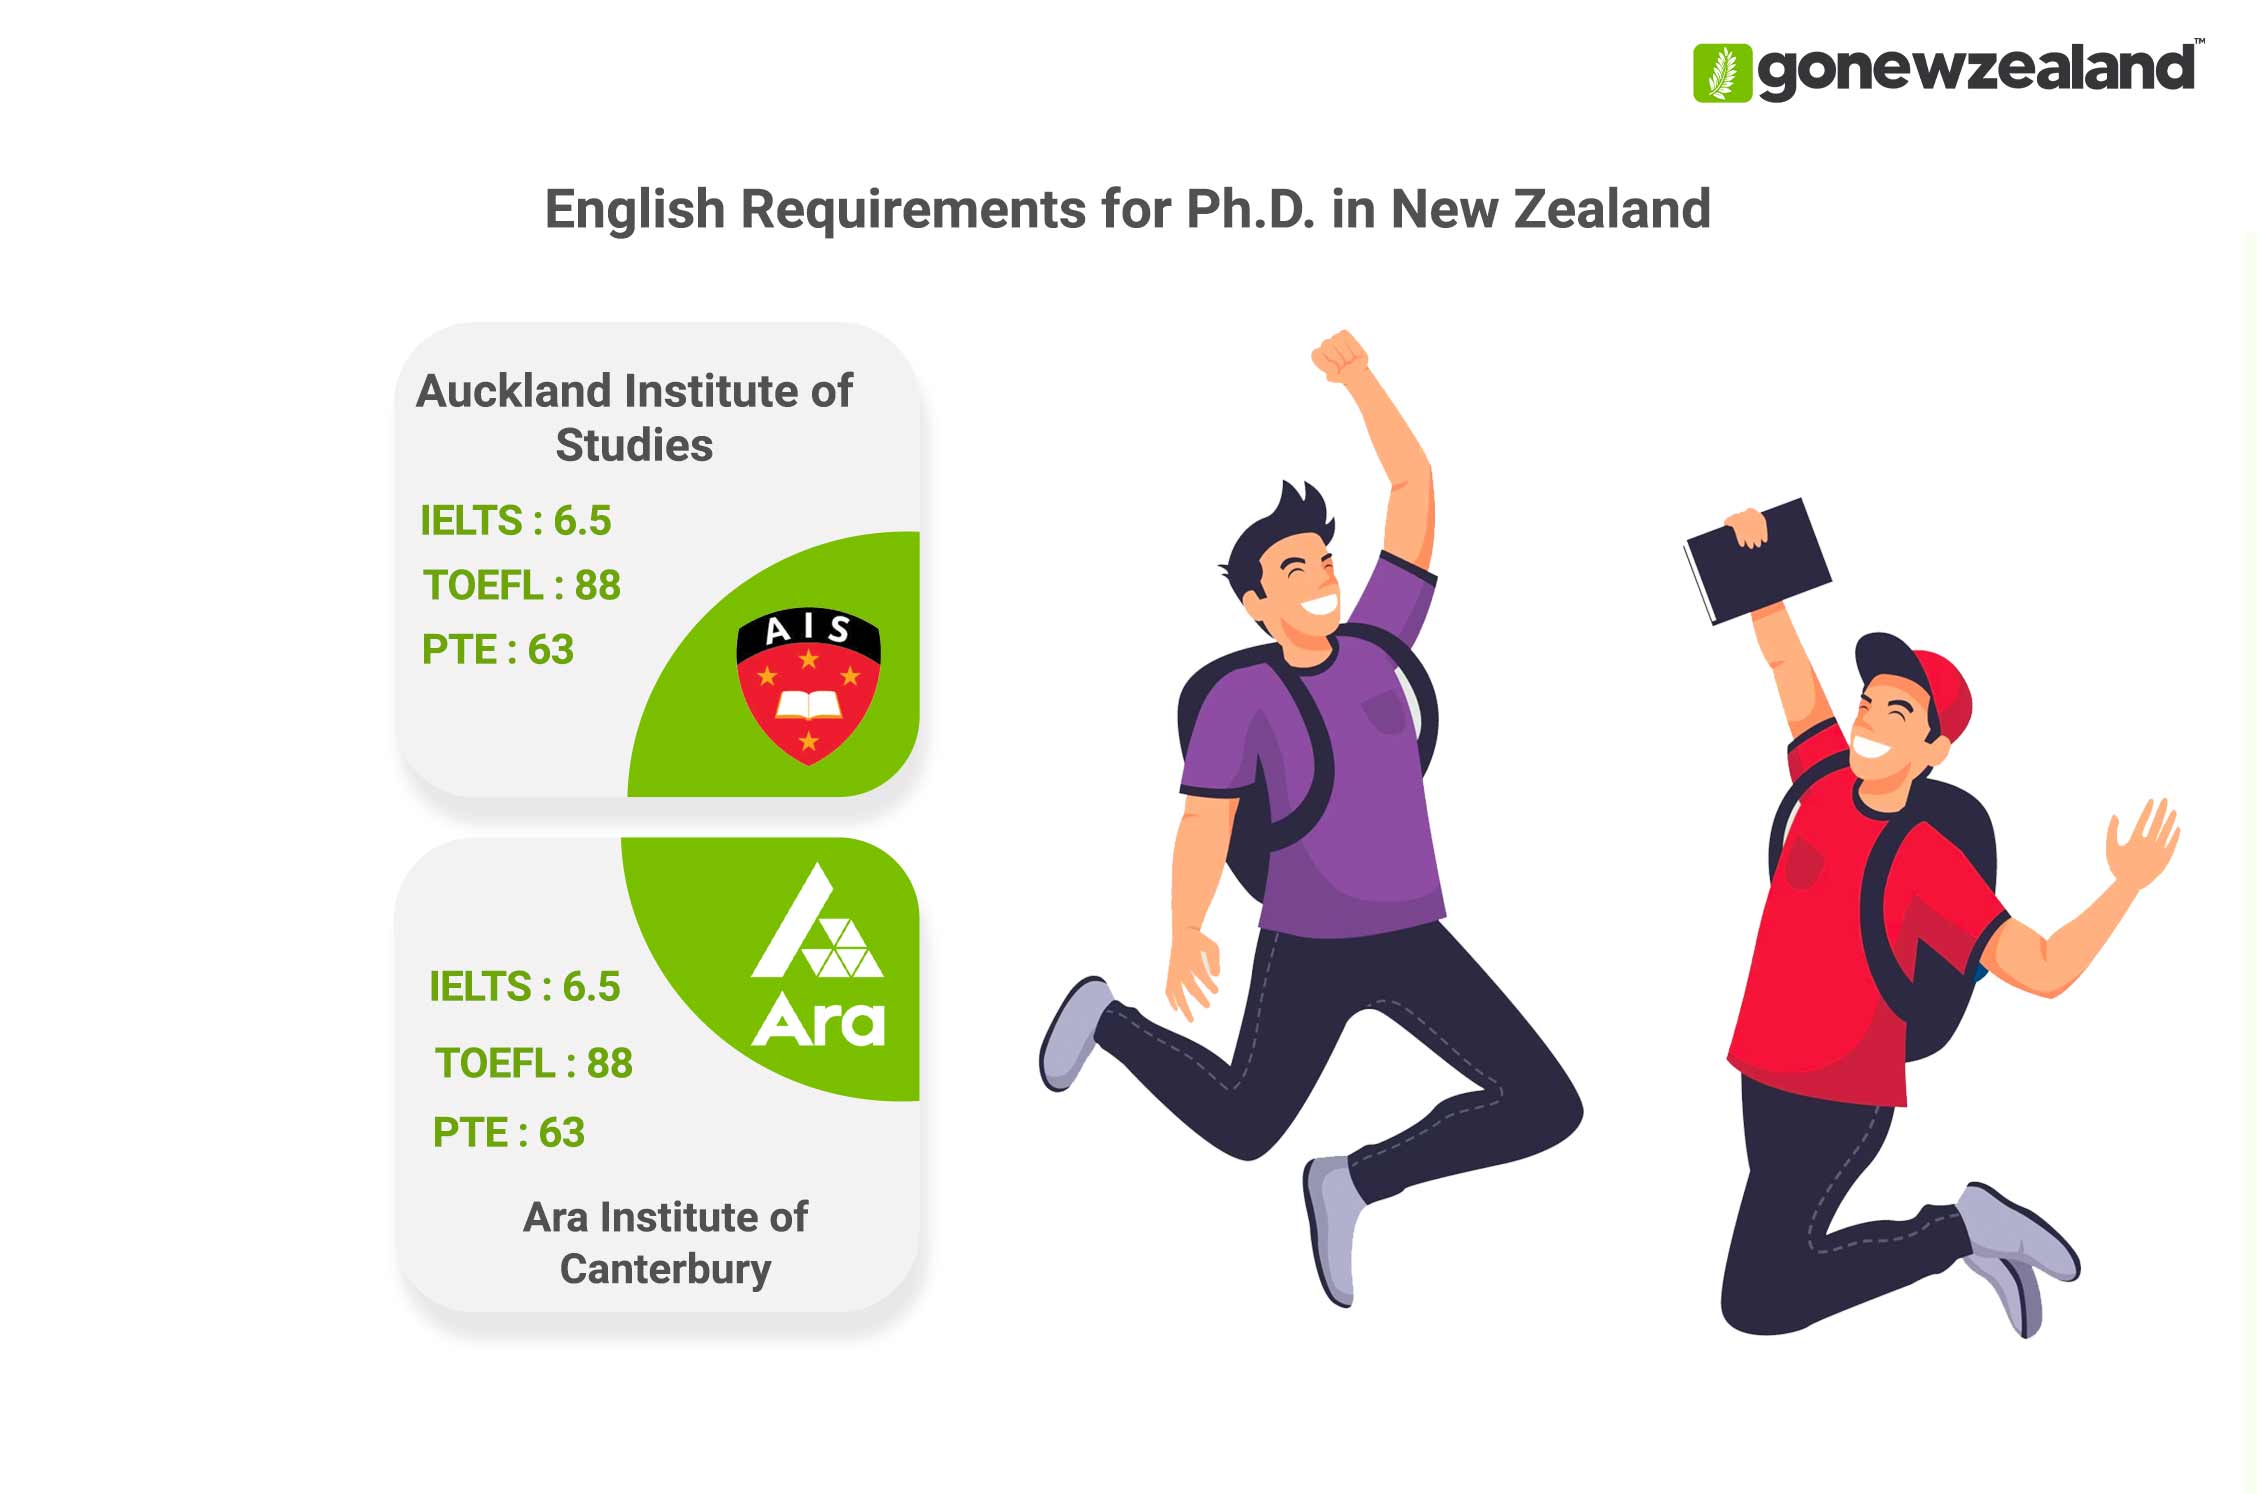 PhD in New Zealand English Language Requirements